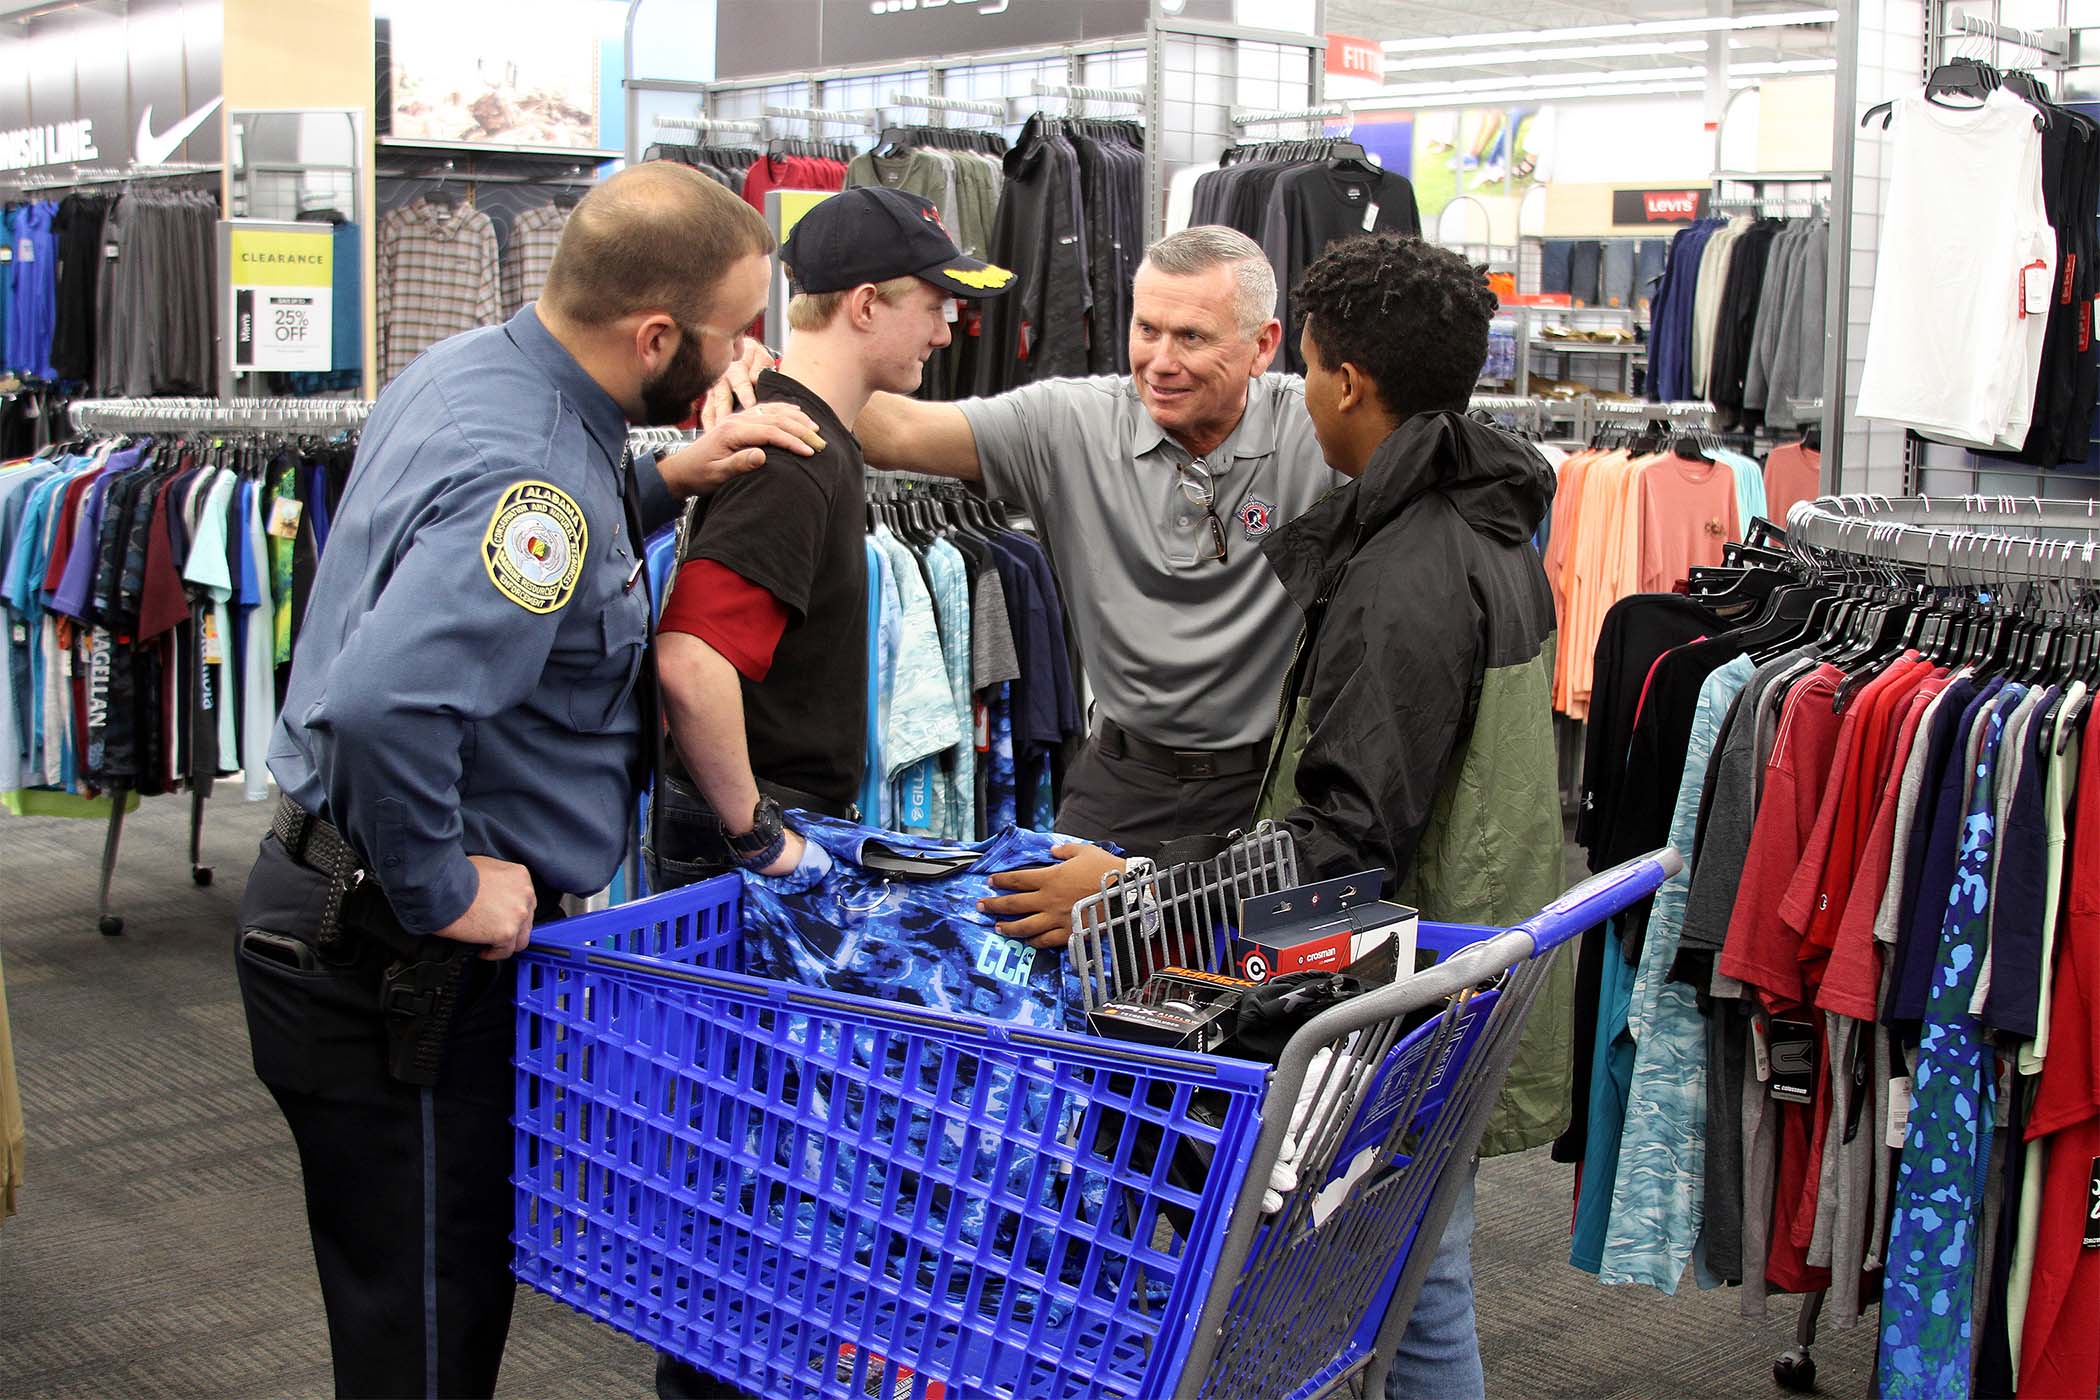 ADCNR officers aid youth at shop with a cop events